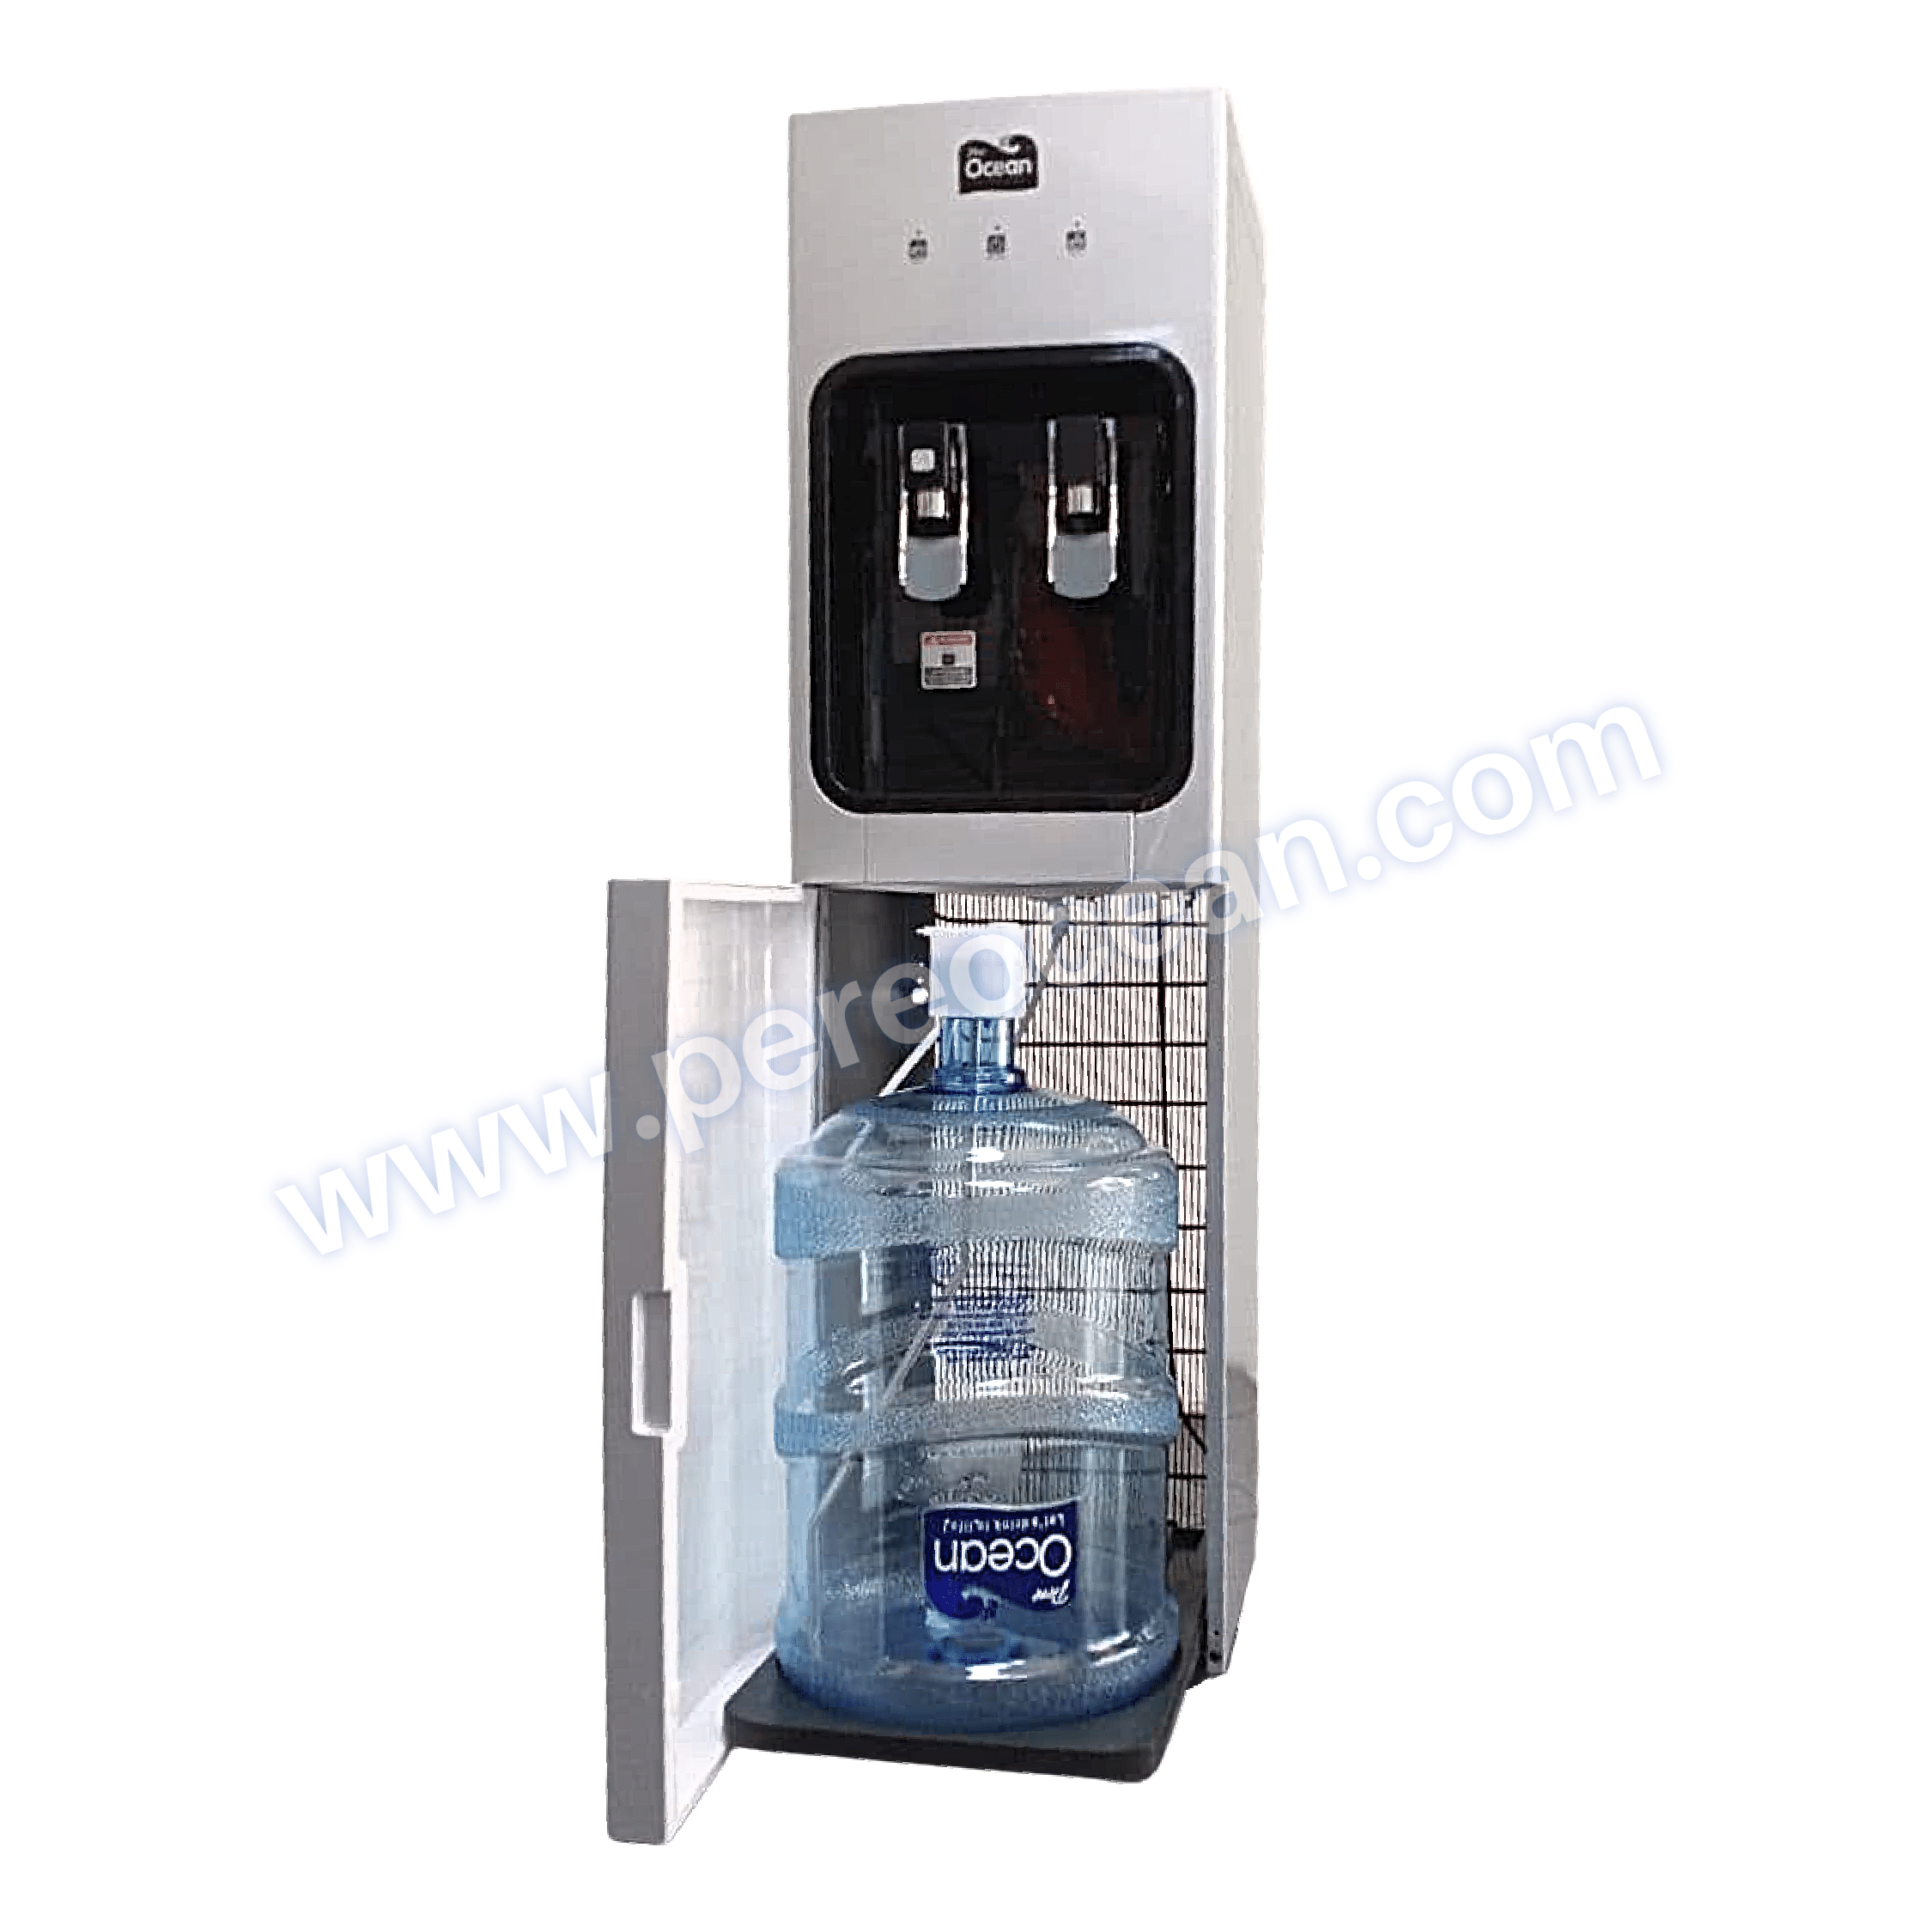 Full Front View of Open Pere Ocean Black Diamond Hot and Cold Bottom Load Floor Standing Bottled Water Dispenser Singapore